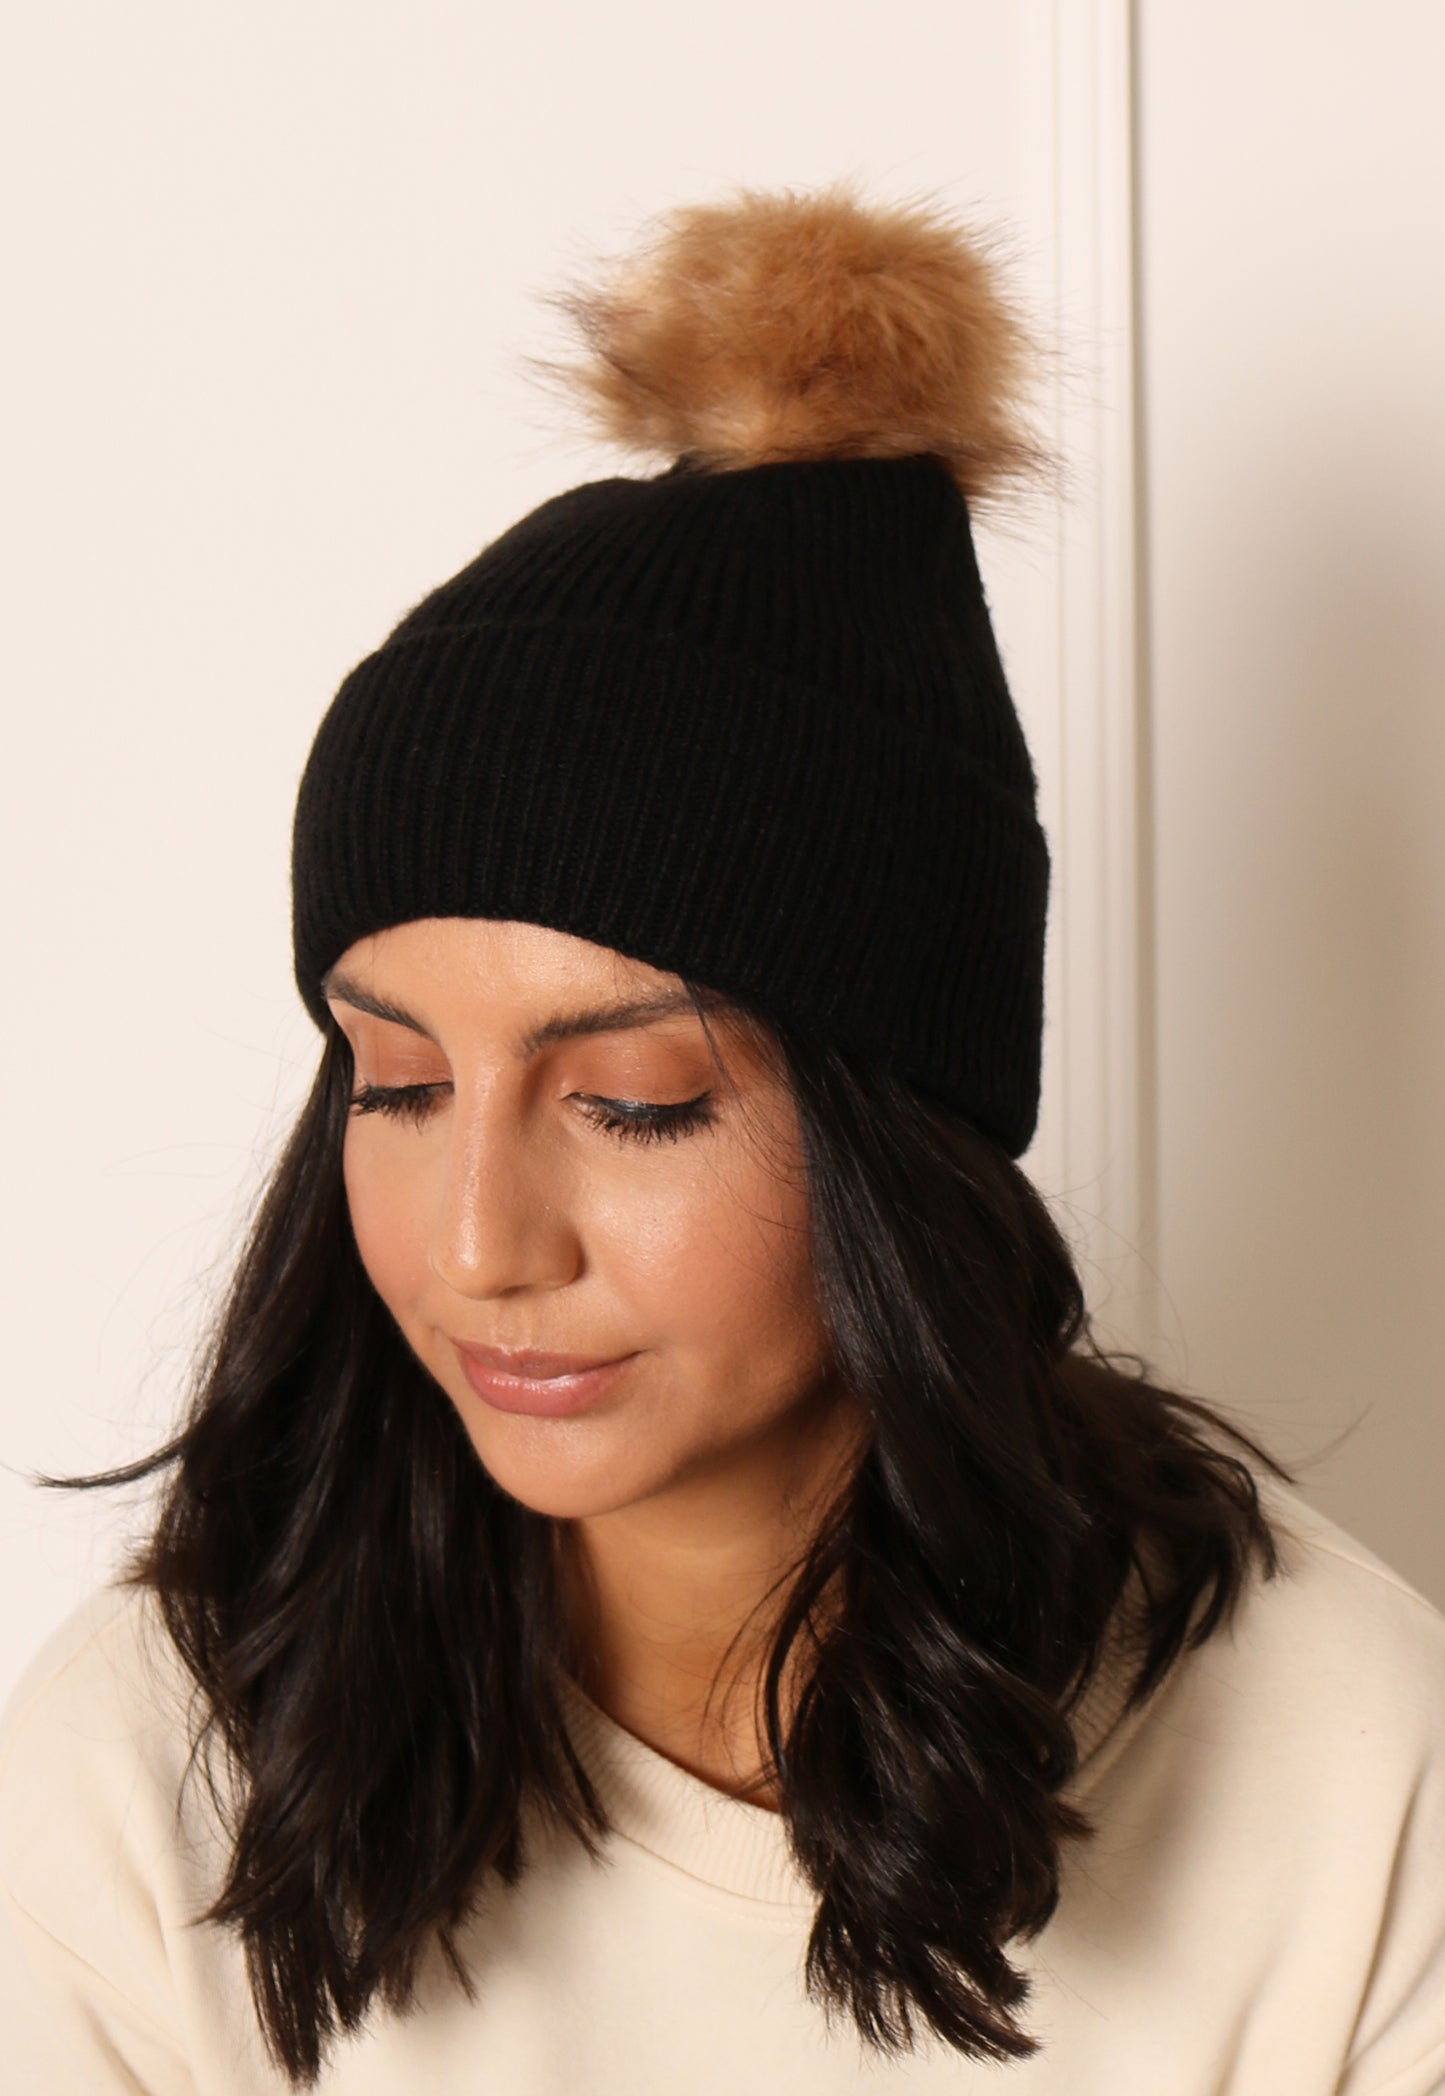 PIECES Rib Knit Beanie Hat with Faux Fur Pom in Black & Natural - One Nation Clothing